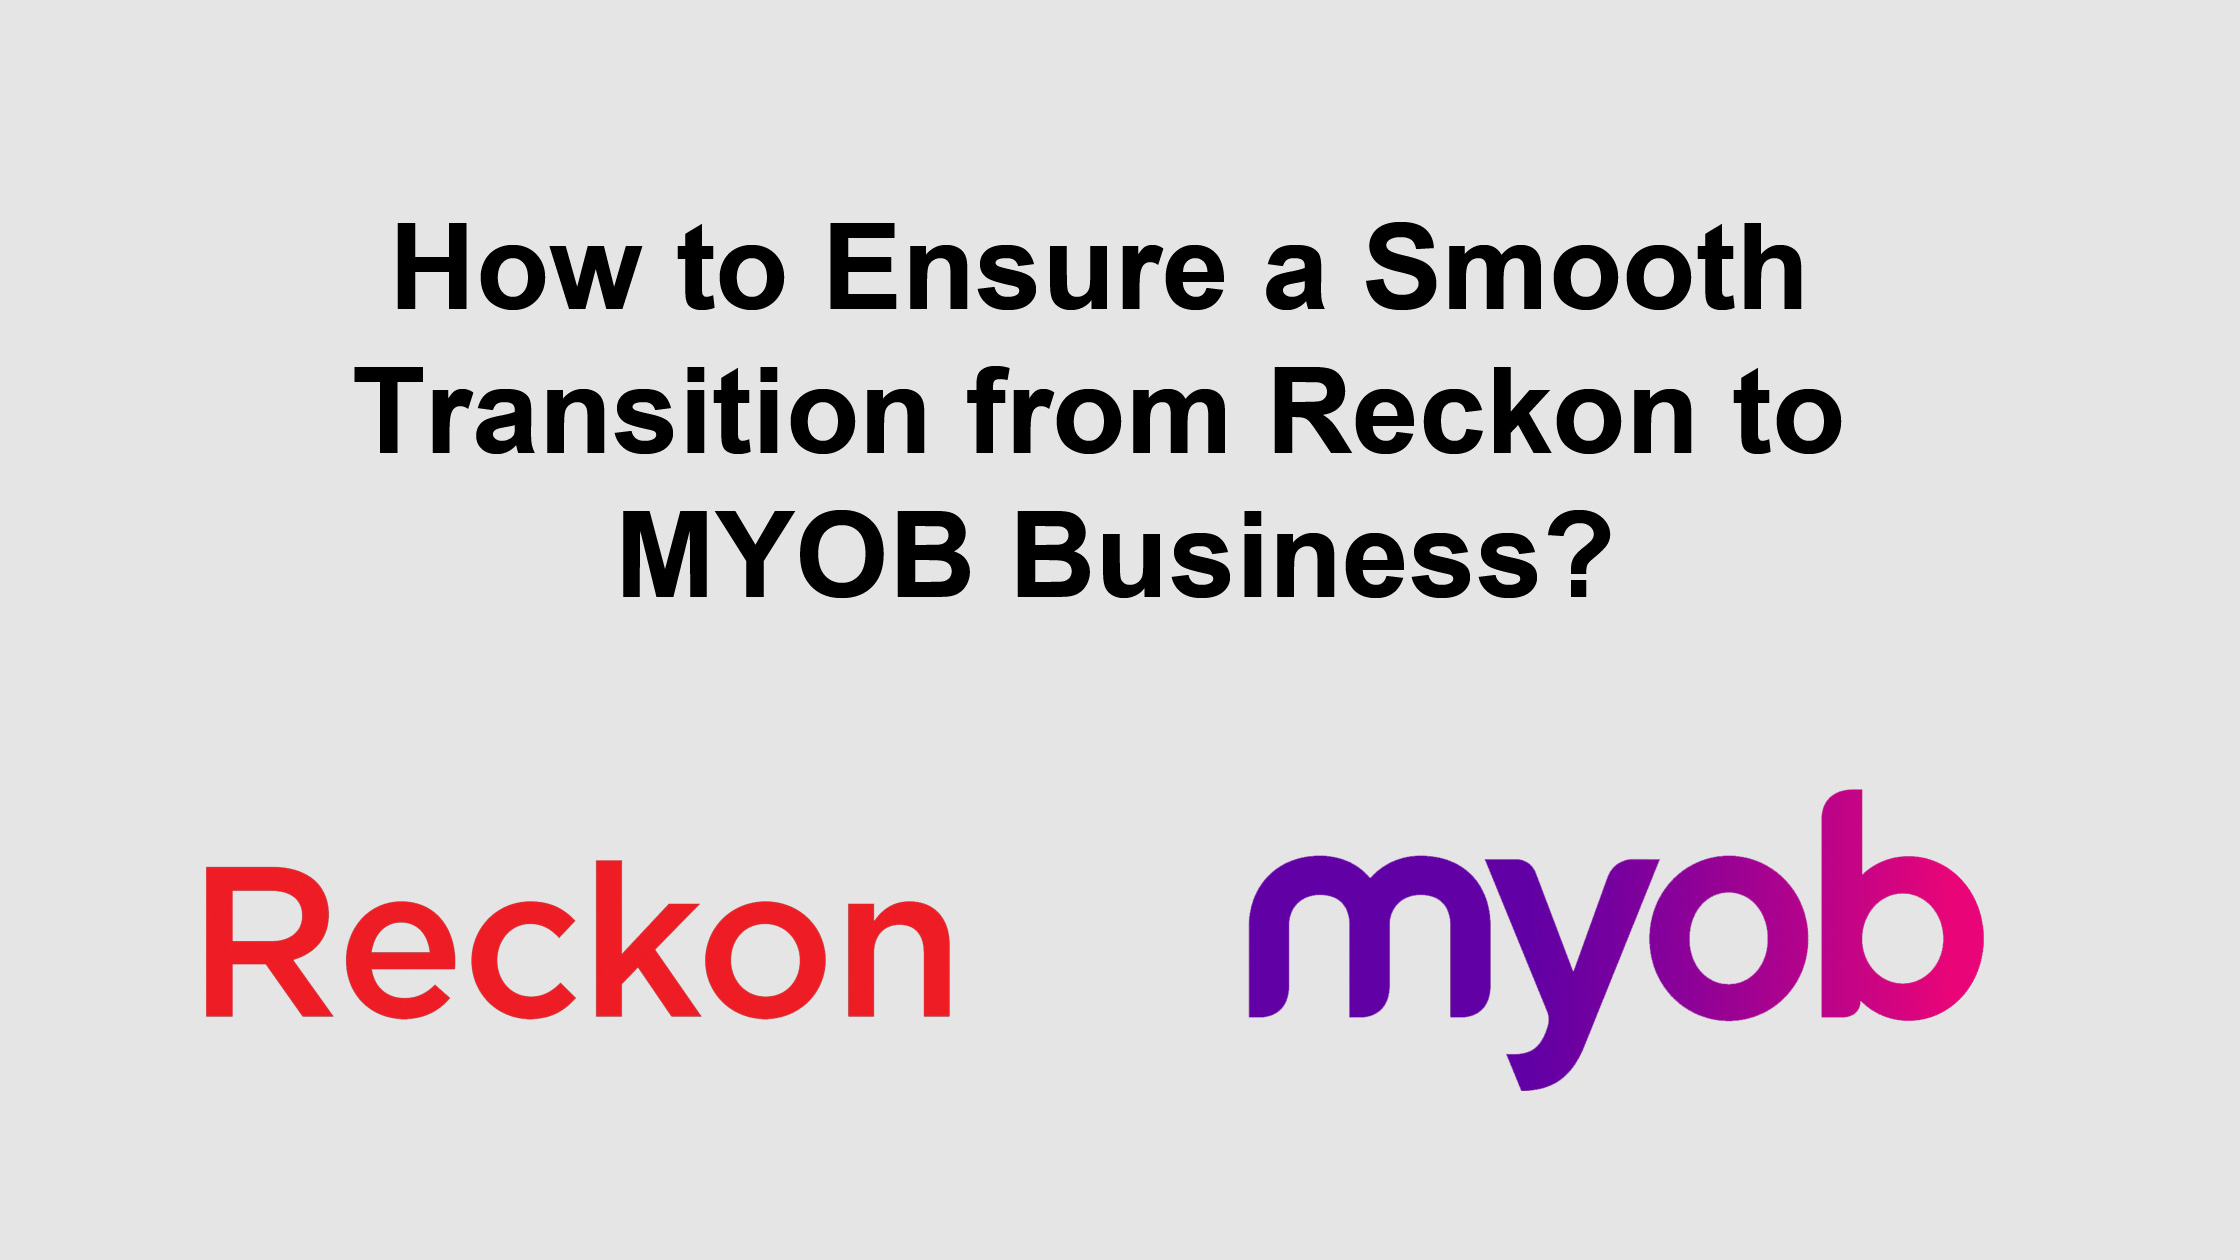 How to Ensure a Smooth Transition from Reckon to MYOB Business?